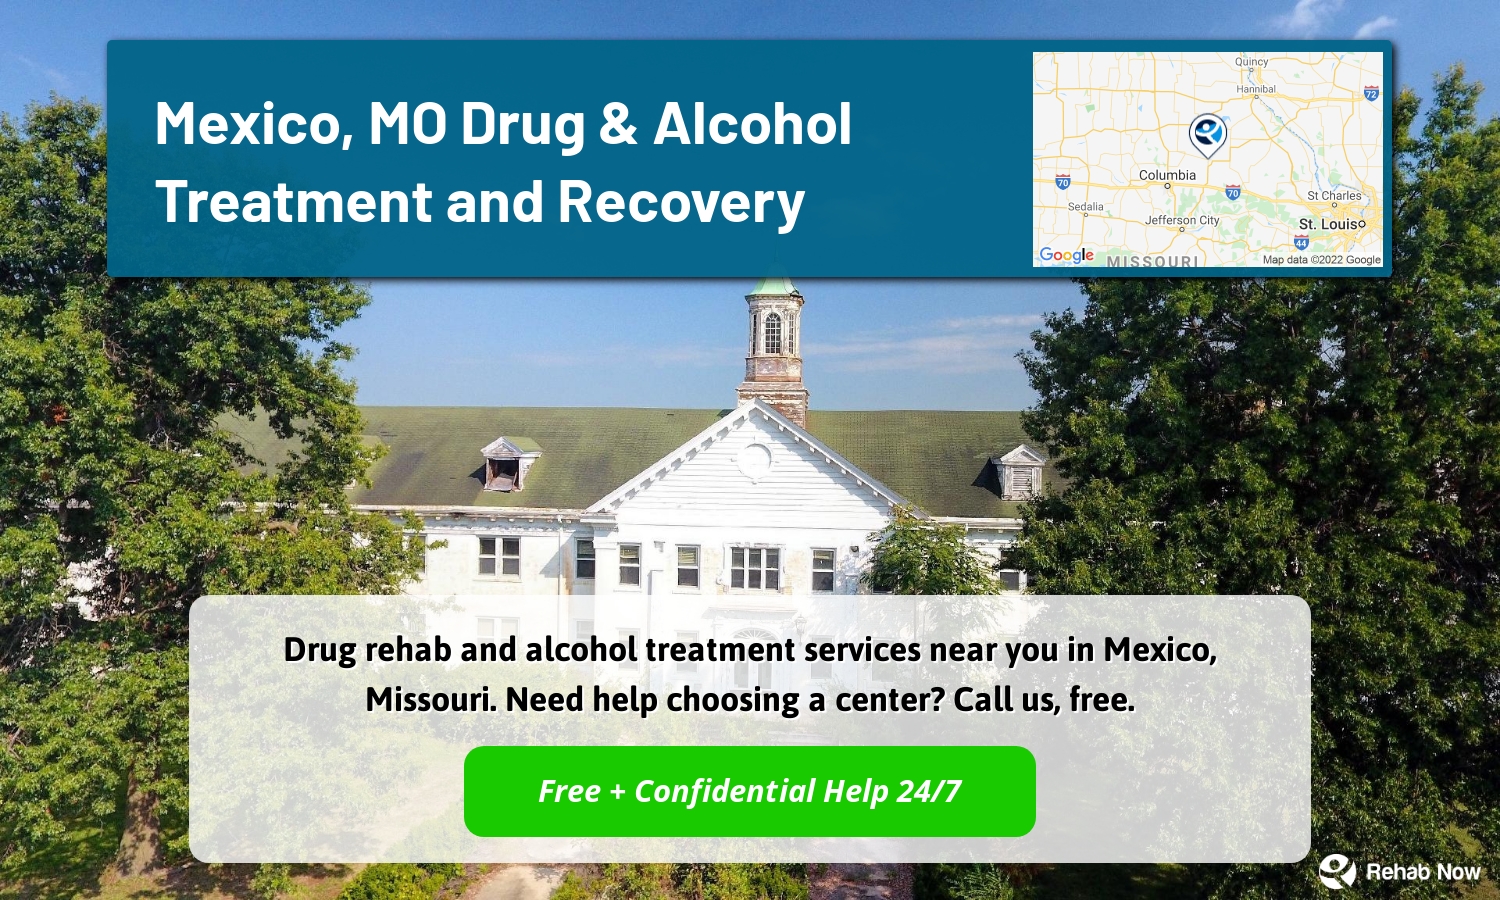 Drug rehab and alcohol treatment services near you in Mexico, Missouri. Need help choosing a center? Call us, free.